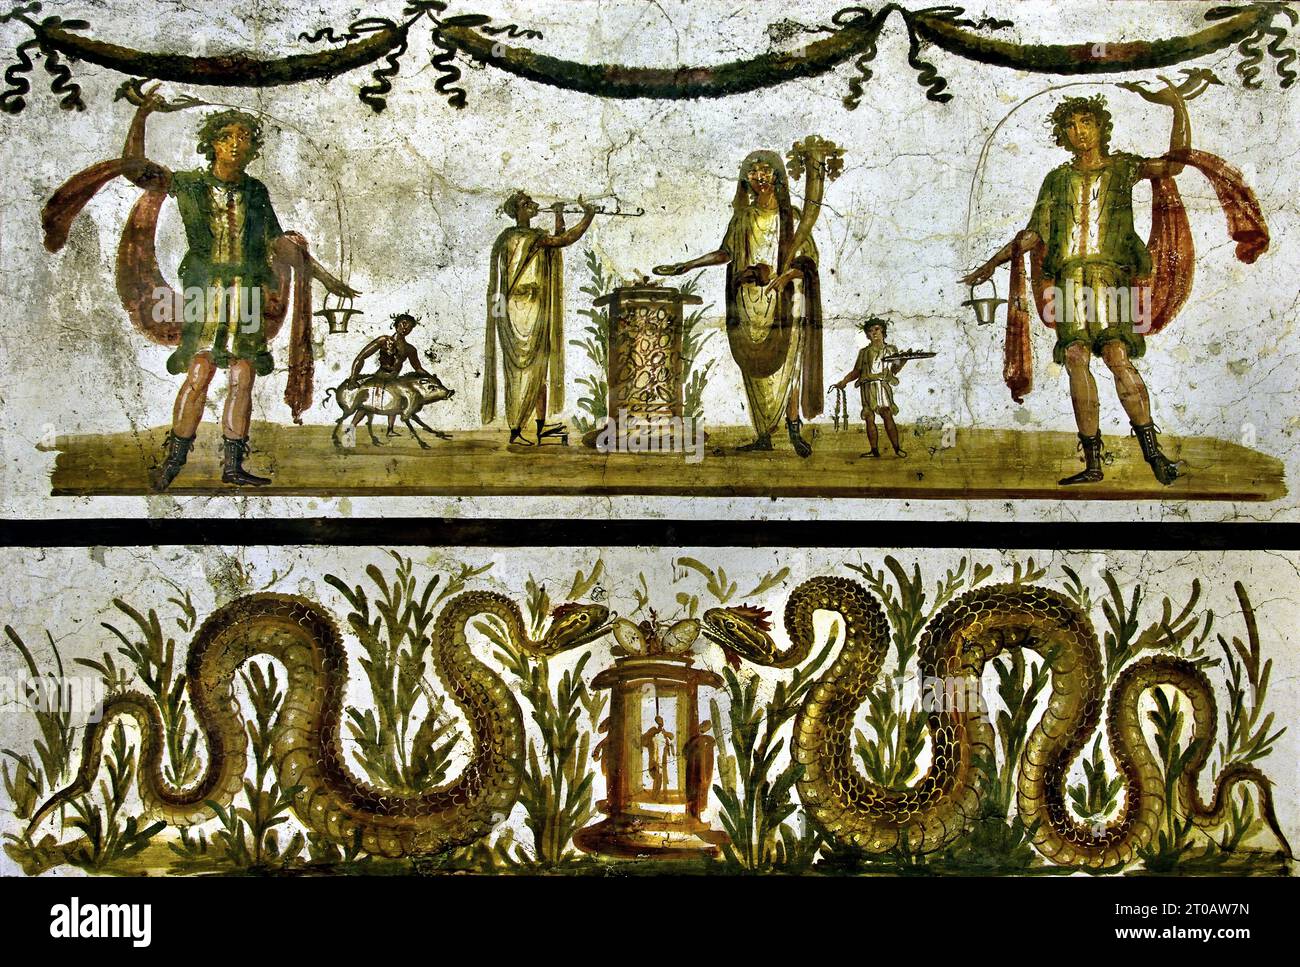 Lari e serpenti - Lares and snakes ( The lararium, a common expression of domestic religiosity, was the place where the images of the Lares and Penates, protectors of the hearth, were placed ) 55-79 AD Fresco Pompeii Roman City is located near Naples in the Campania region of Italy. Pompeii was buried under 4-6 m of volcanic ash and pumice in the eruption of Mount Vesuvius in AD 79. Italy ( Scene of a Genius, assited by a Camillus, sacrificing at an altar as a musician plays de tibia and a slave approaches driving a sacrificial pig ) Stock Photo